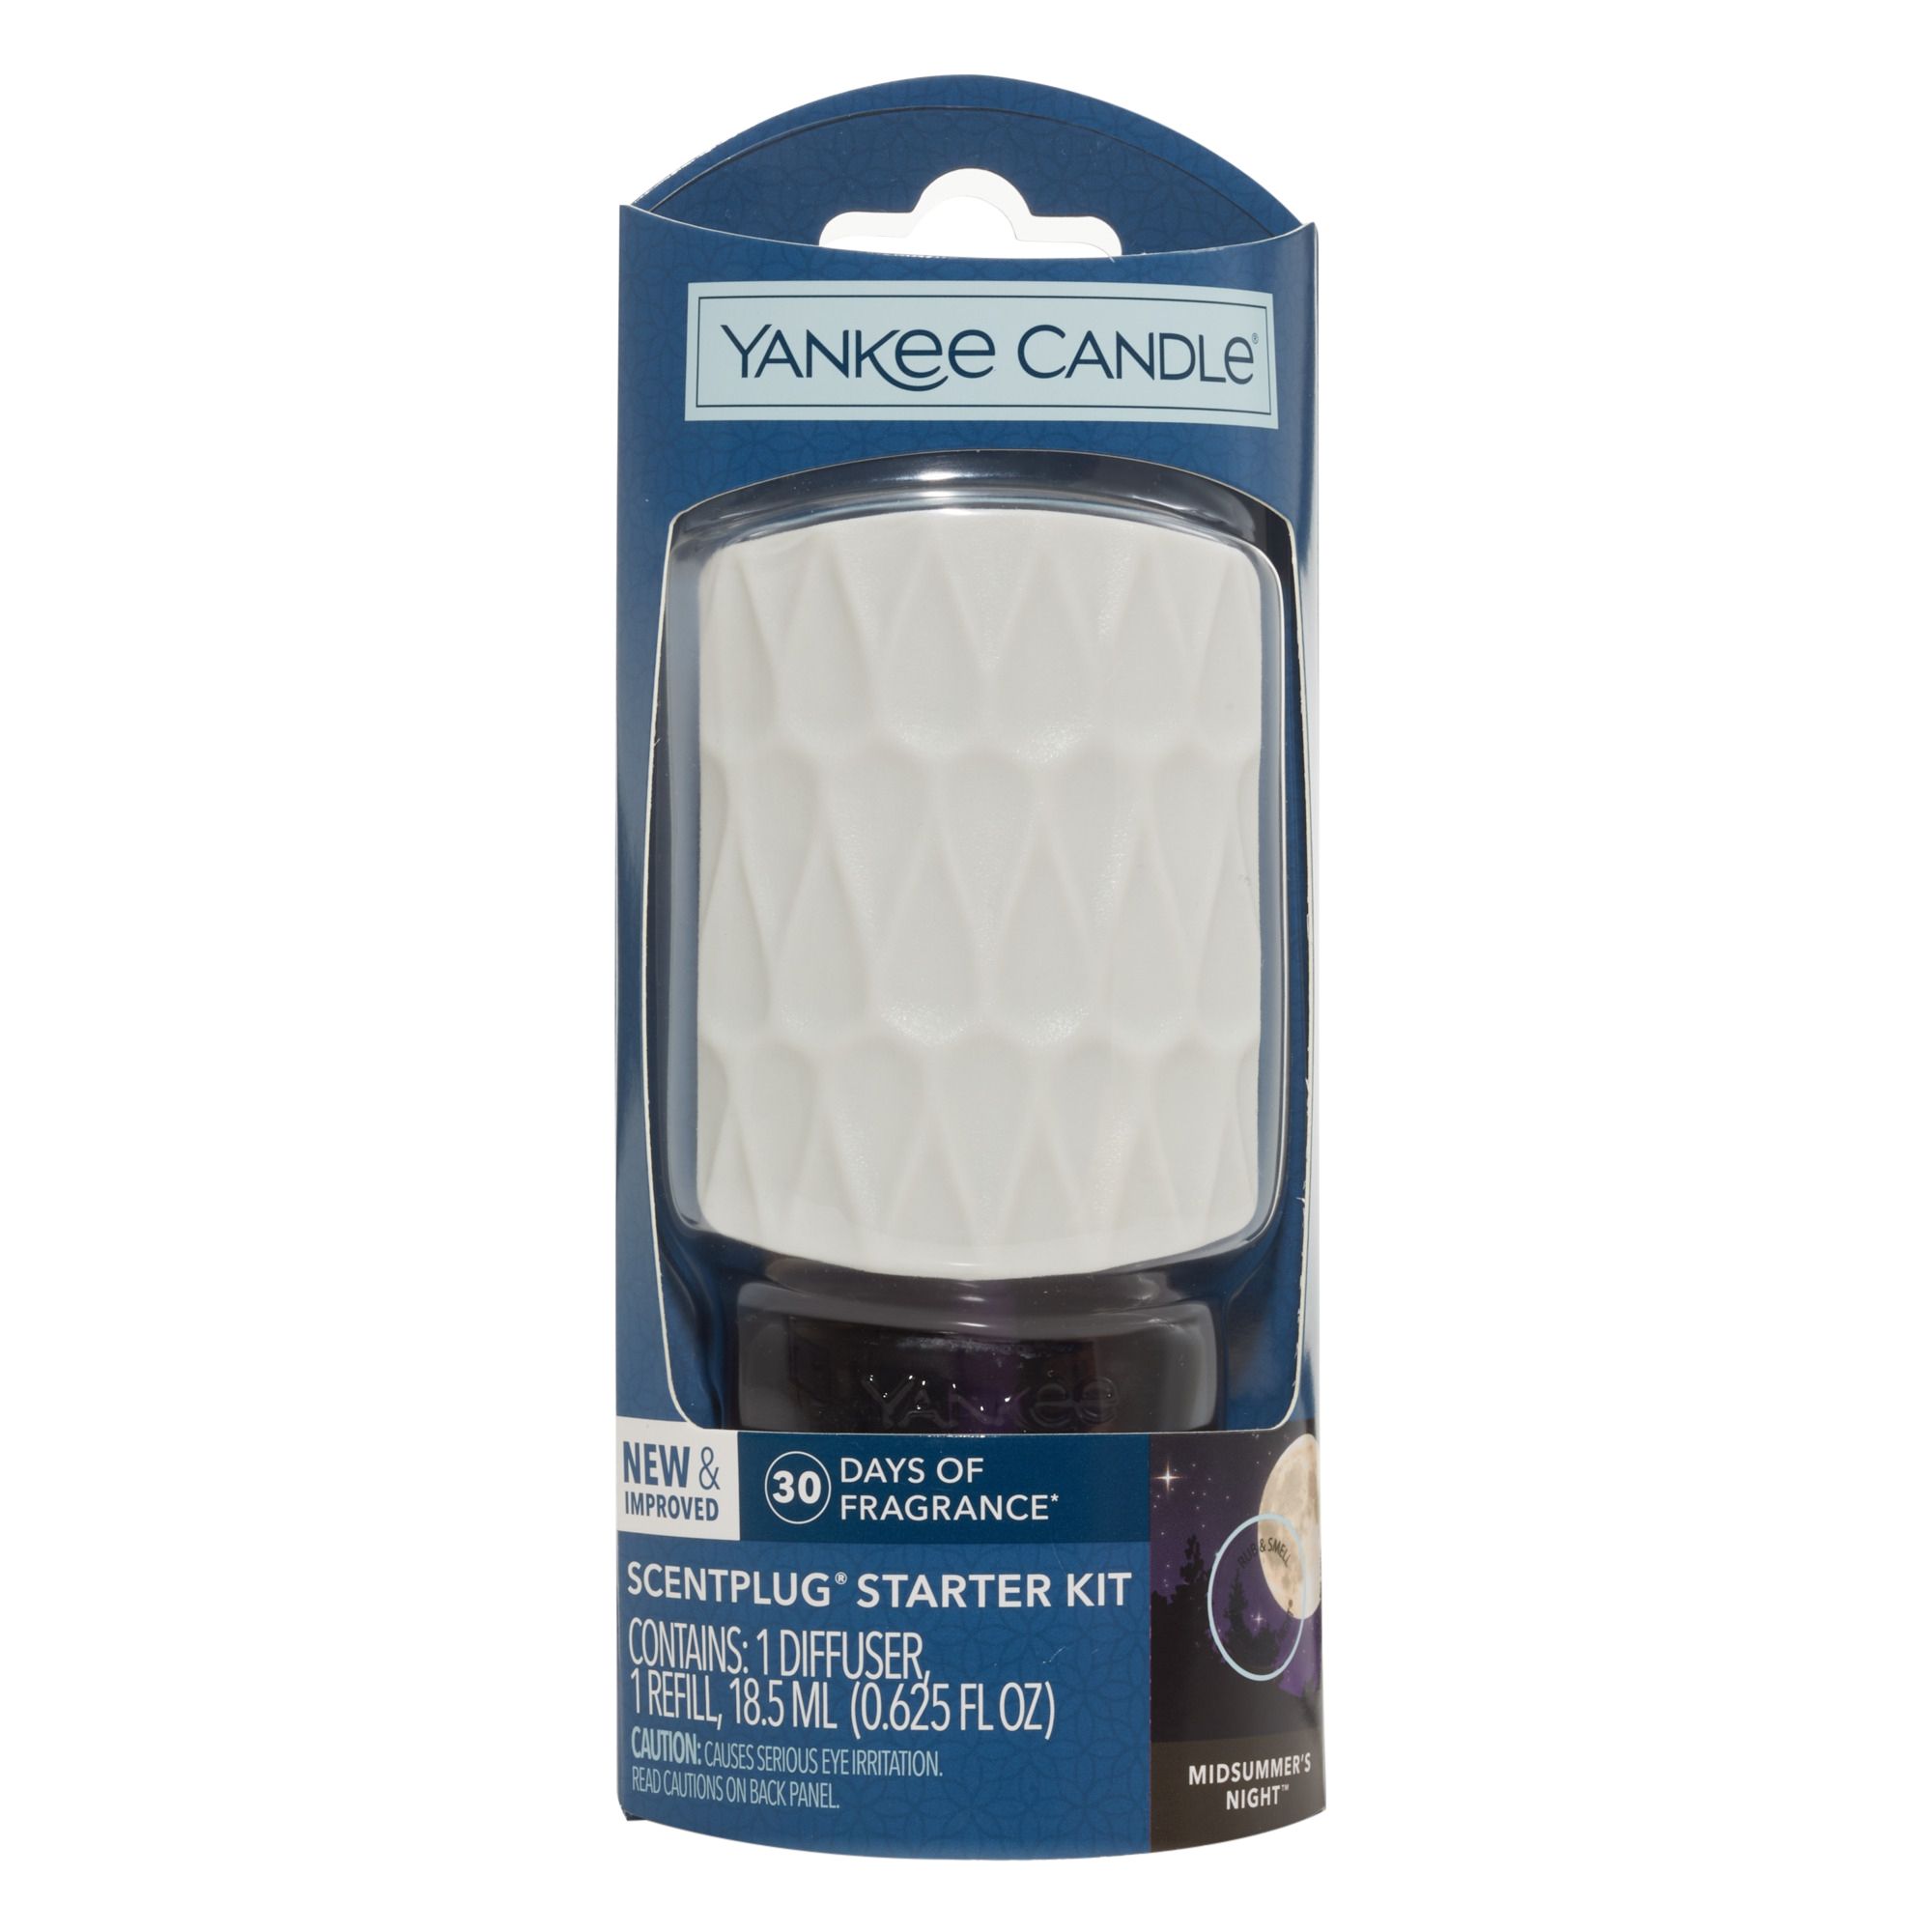 Yankee Candle Midsummer's Night Whole Home Air Freshener